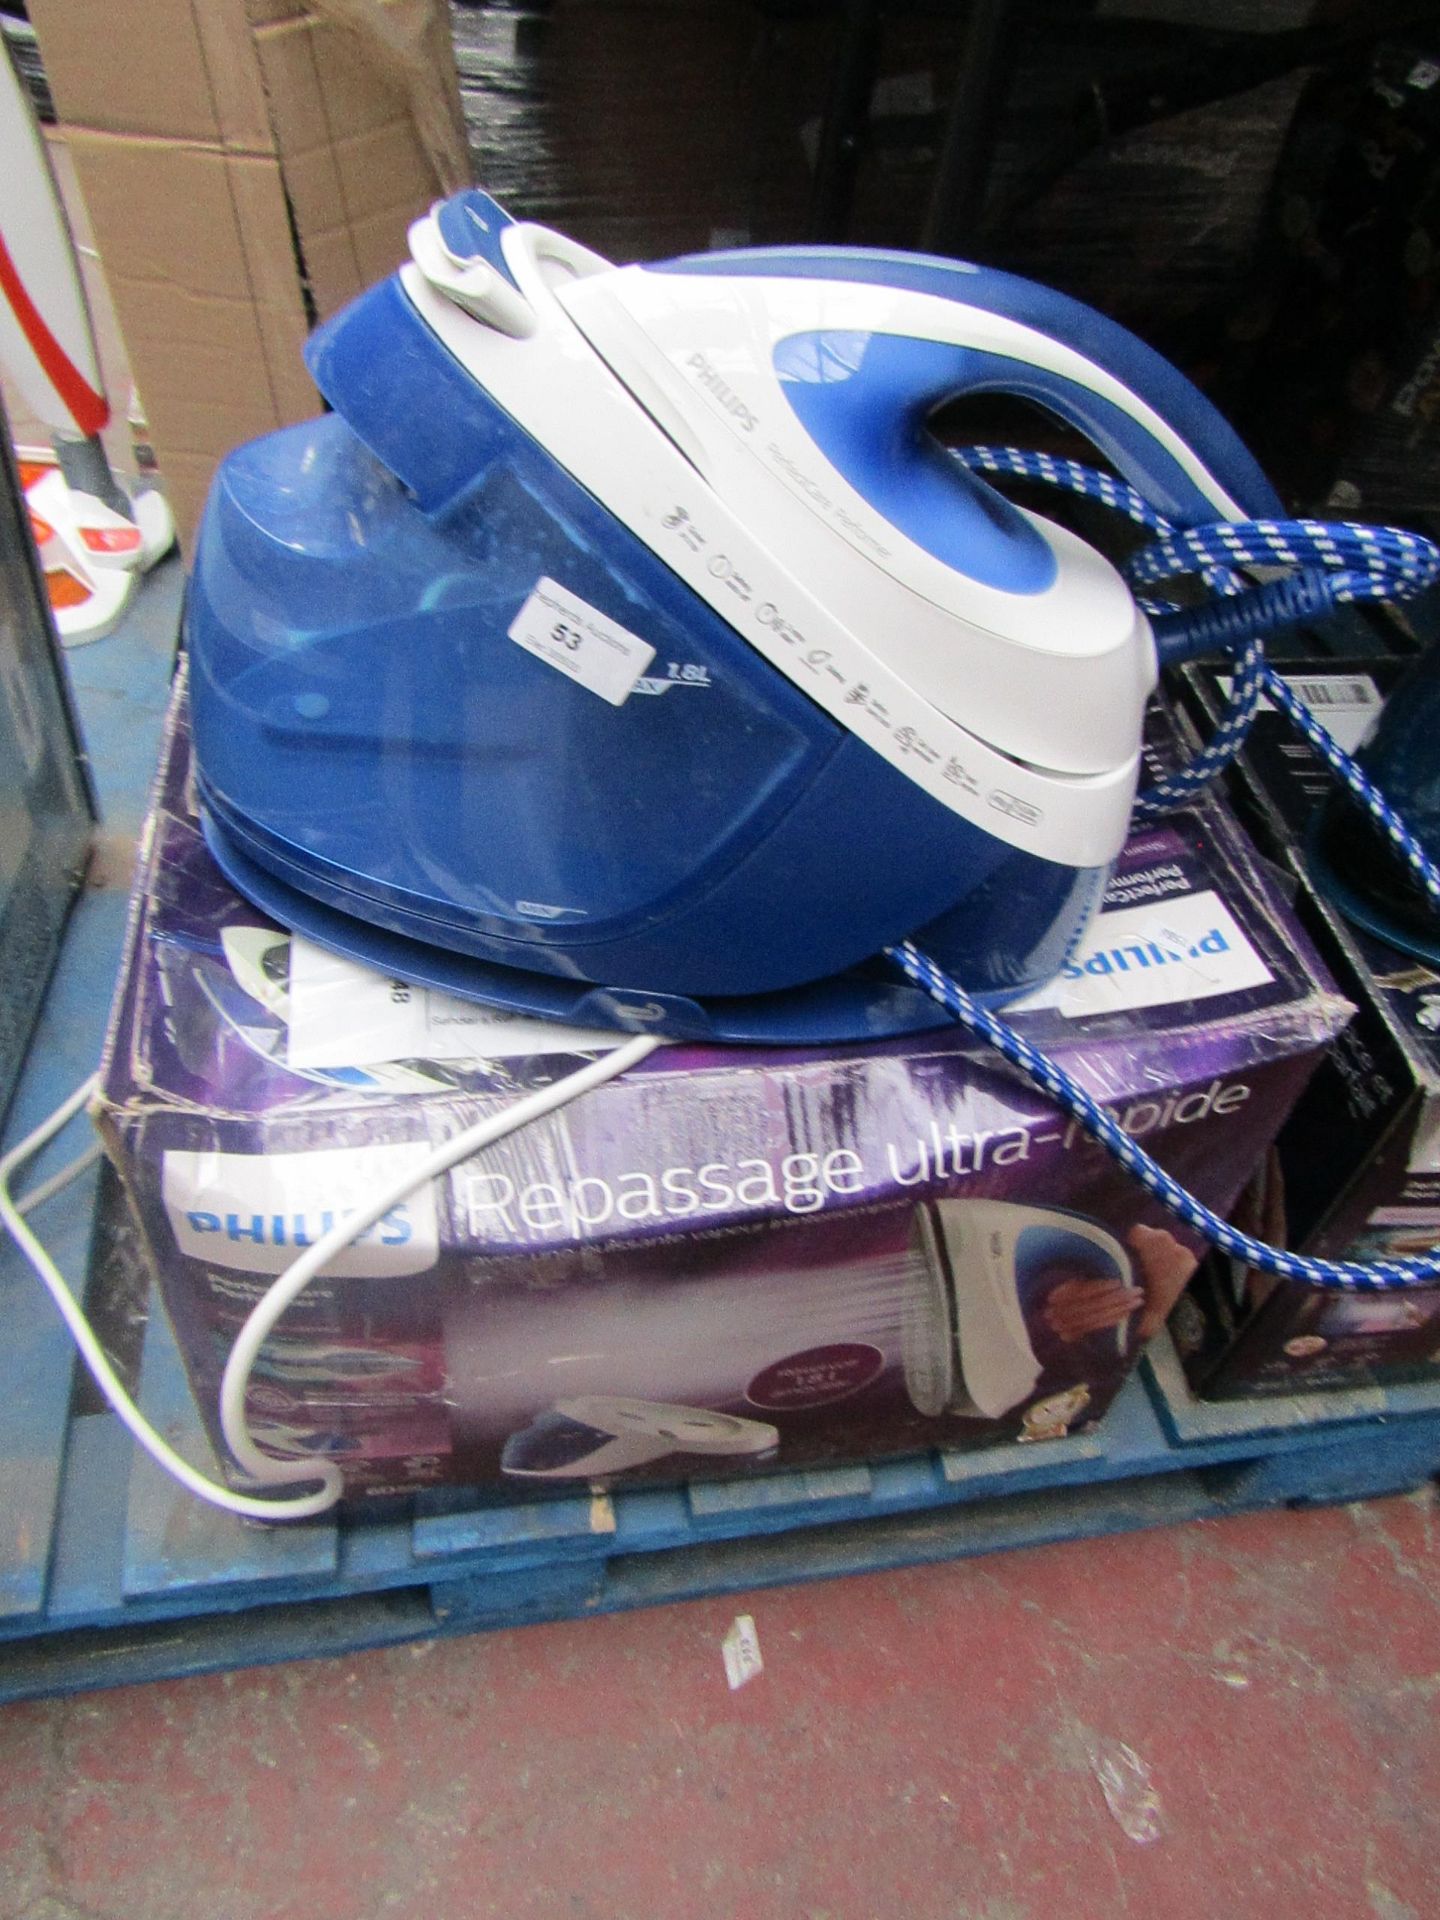 pPhillips Perfect care Performer steam generator iron, tested working for heat, not tried to make it